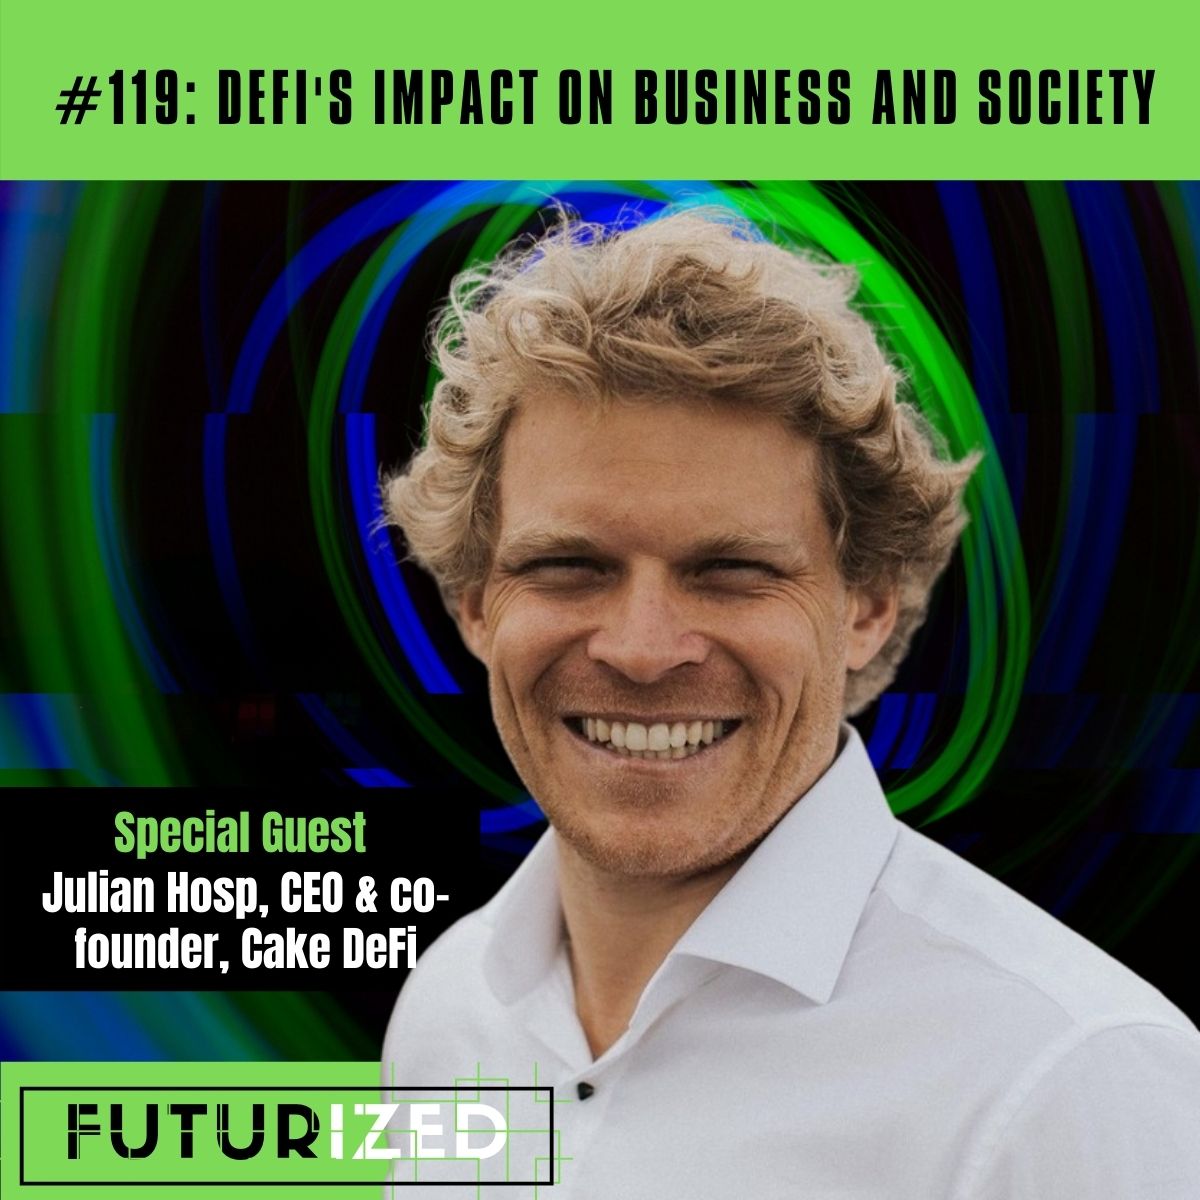 DeFi's impact on Business and Society Image